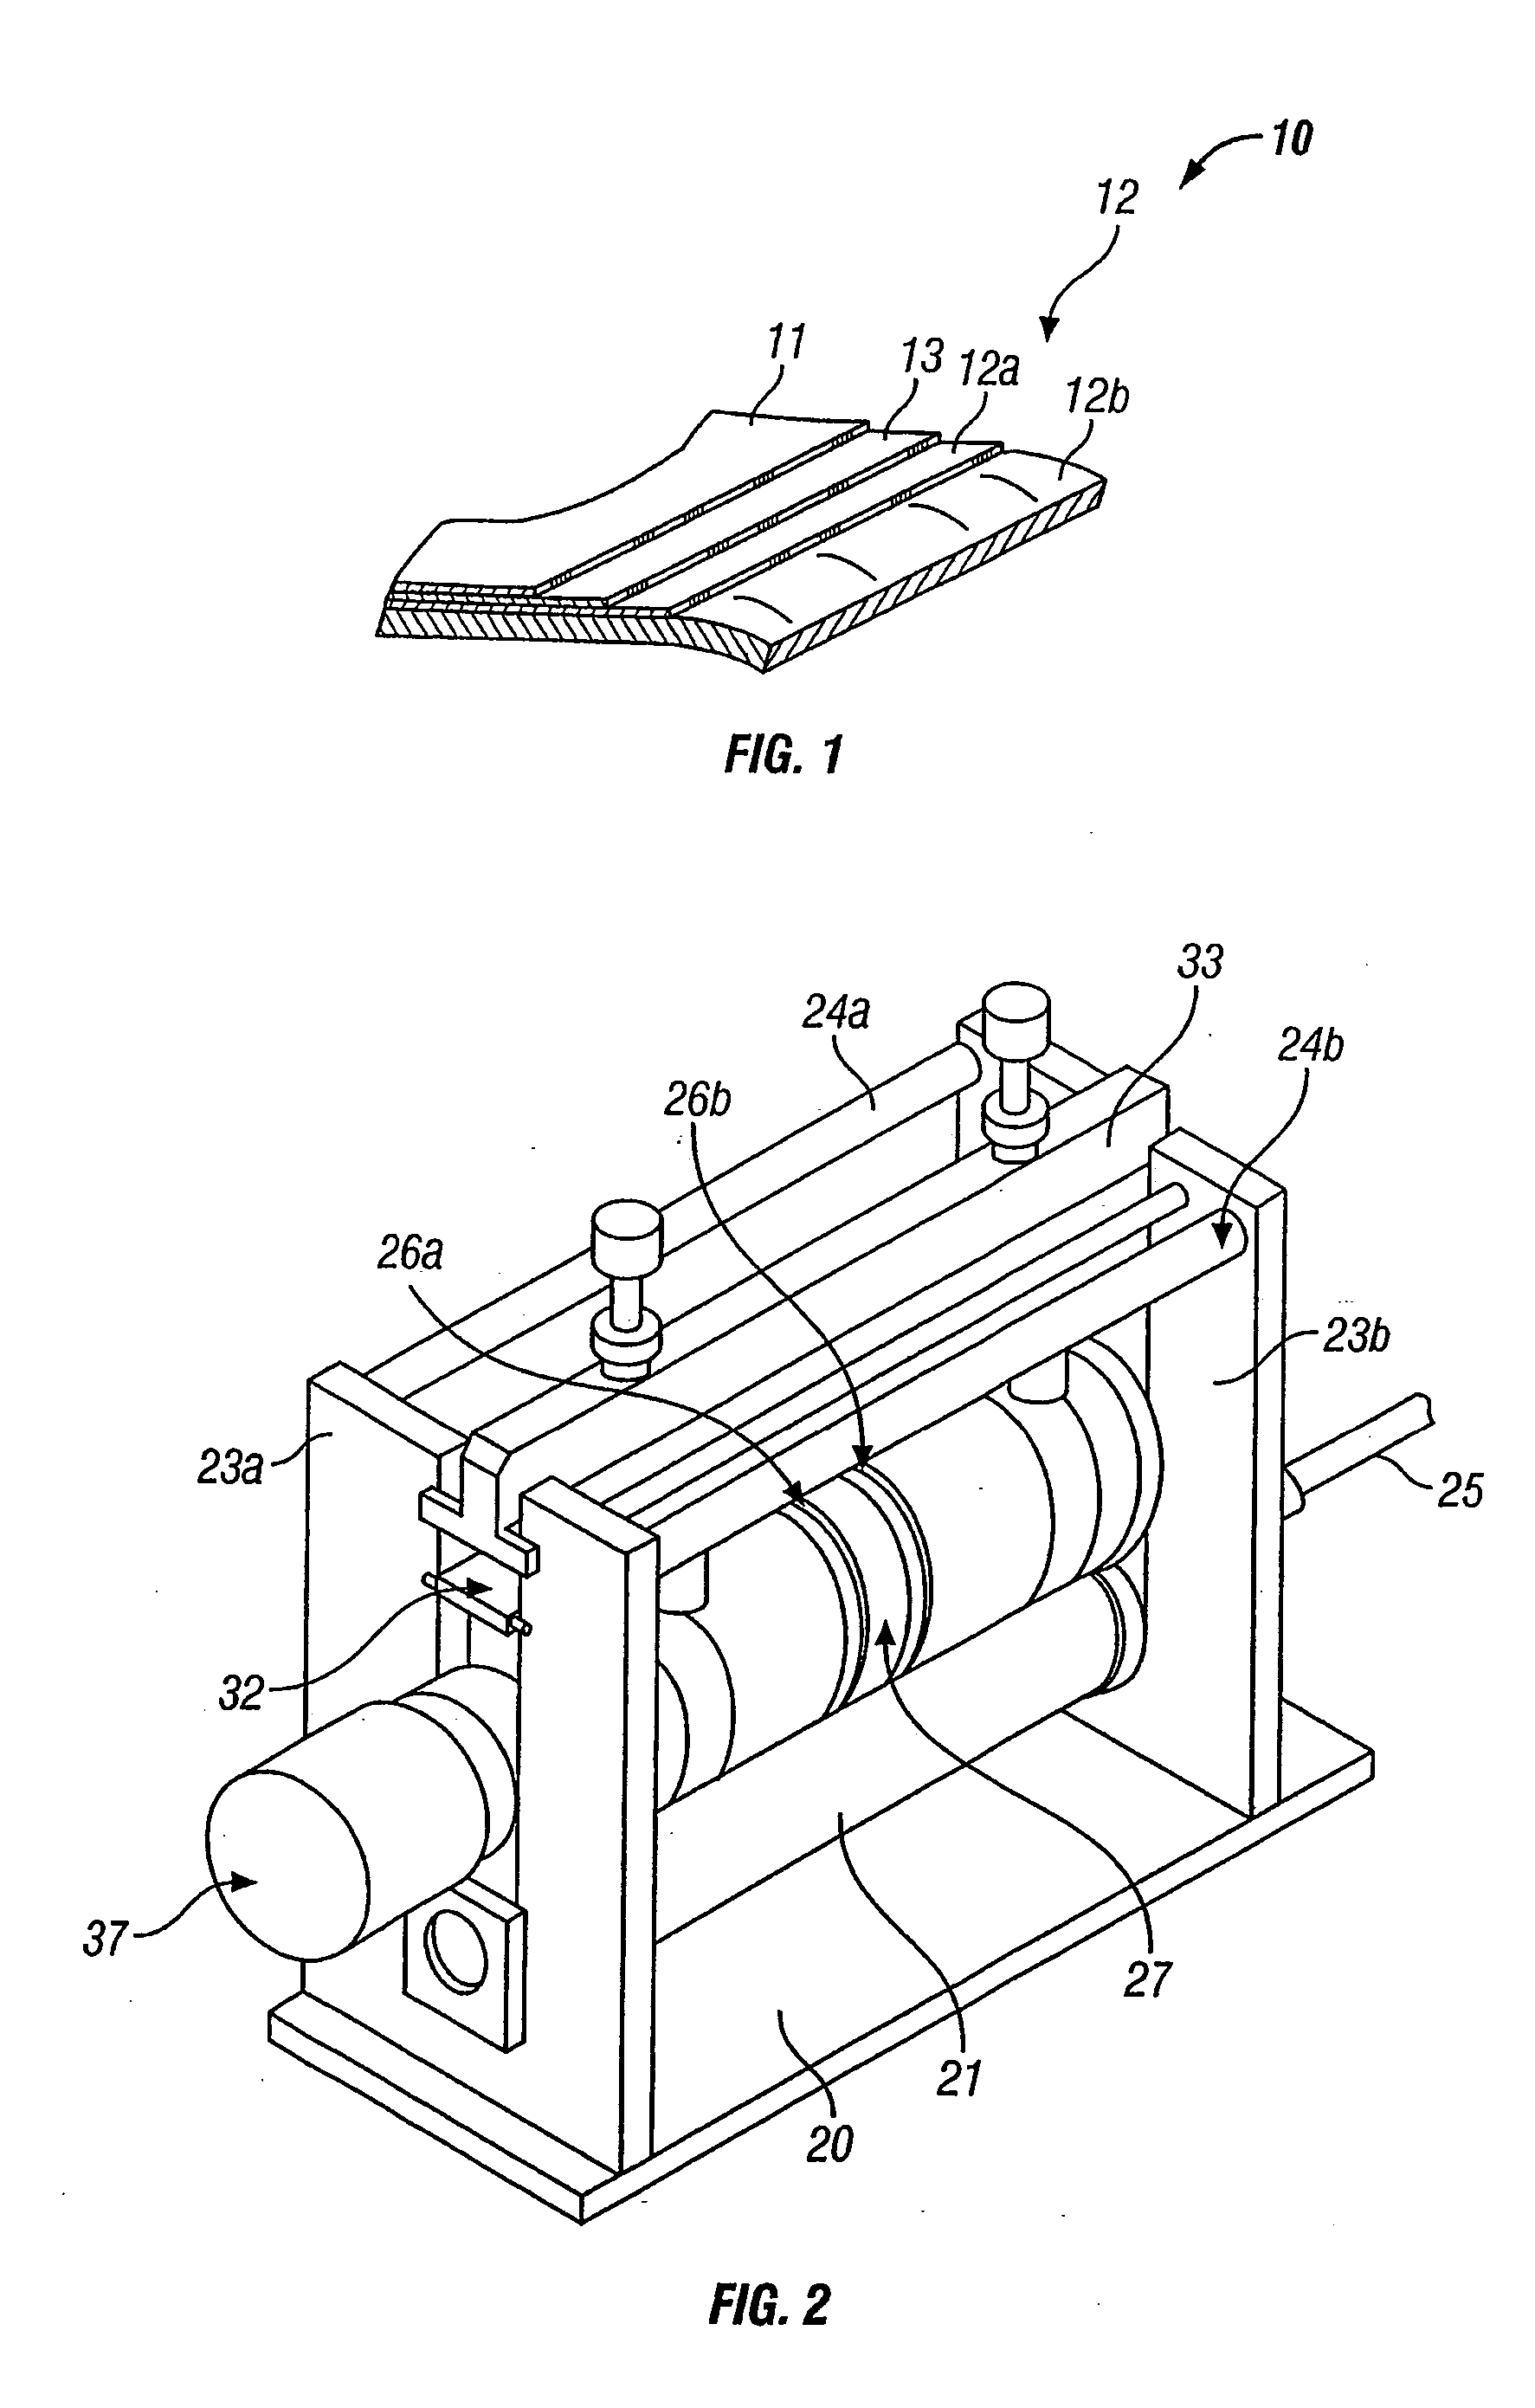 Apparatus for producing scored lines in a film